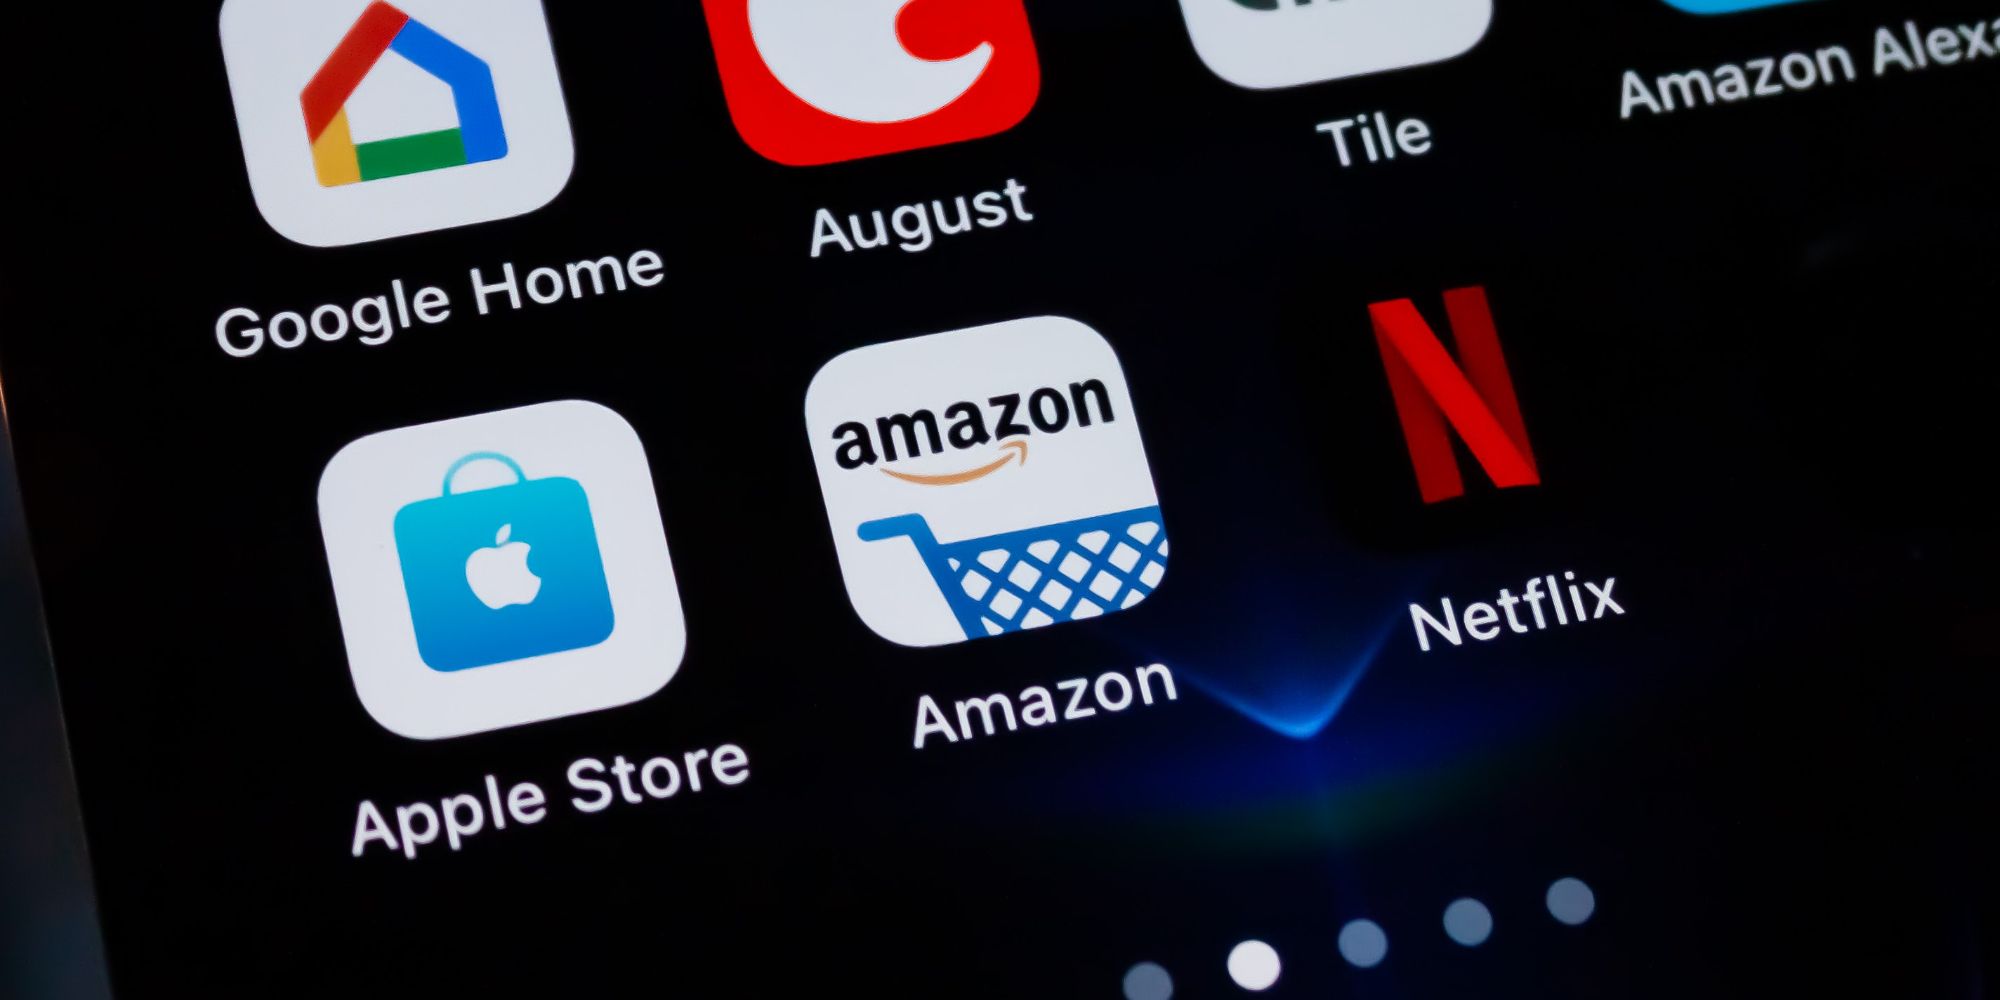 Amazon Prime Day 2021 Date Announced (And It's Sooner Than Expected)